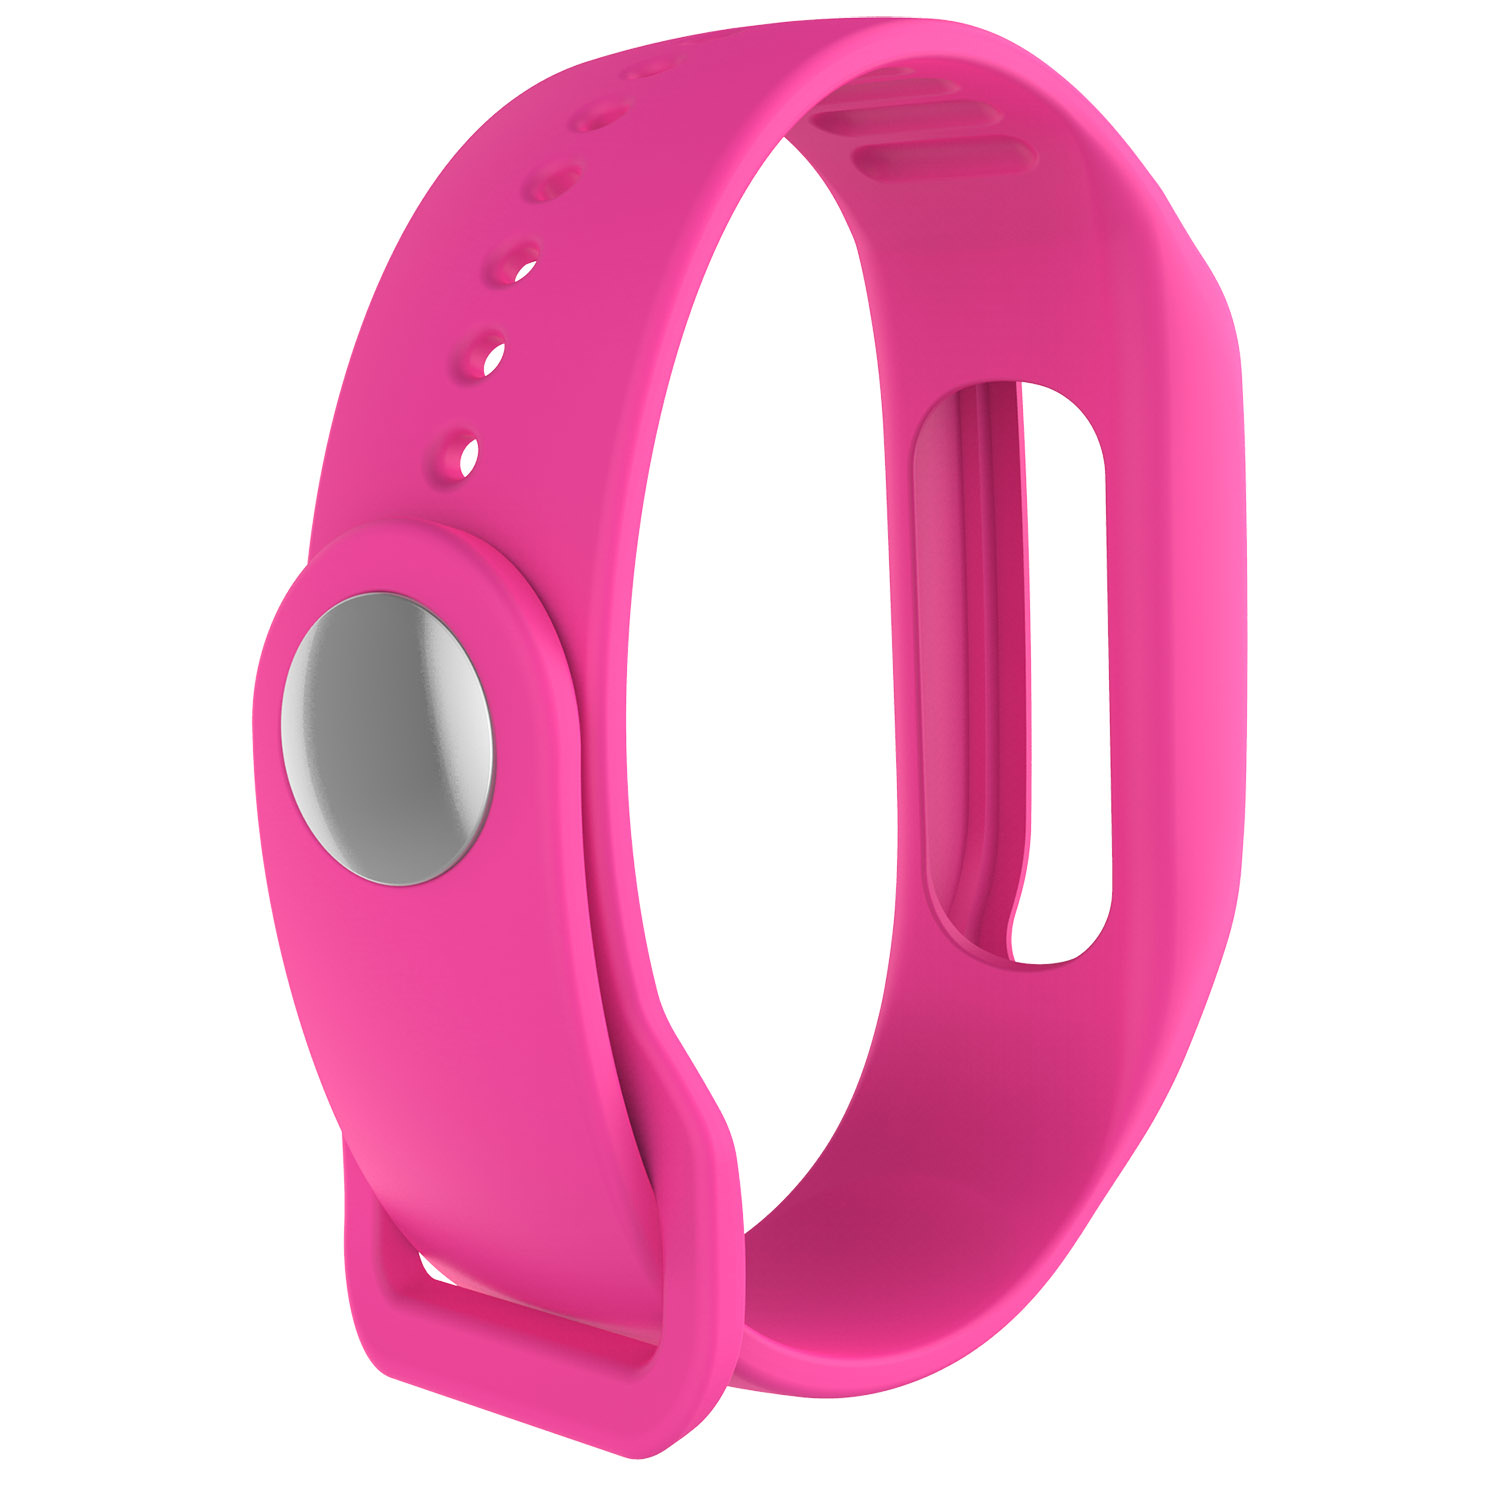 Tomtom Touch Sport Strap - Pink